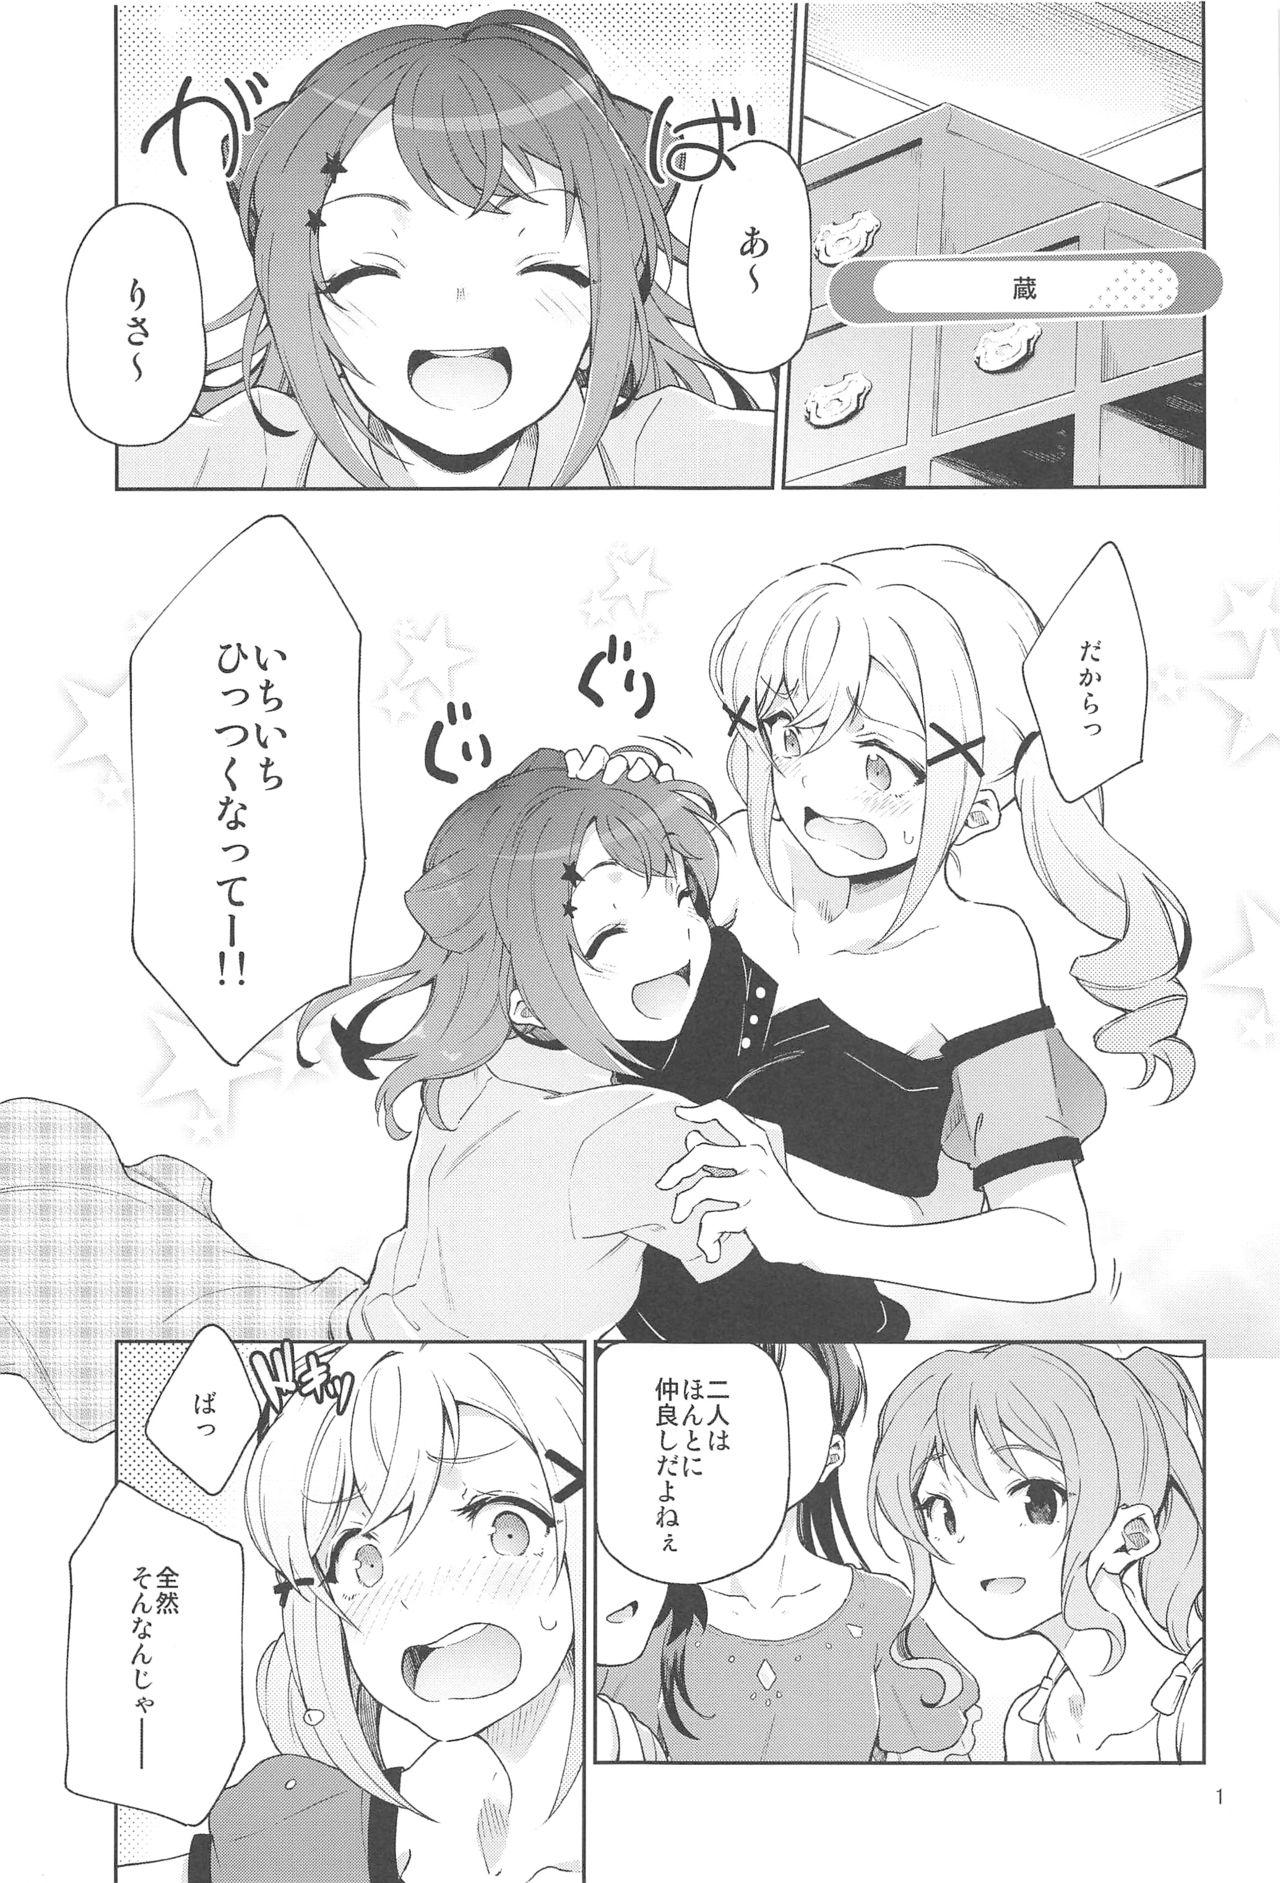 Close Up Jealousy All Night - Bang dream Cuckold - Page 2